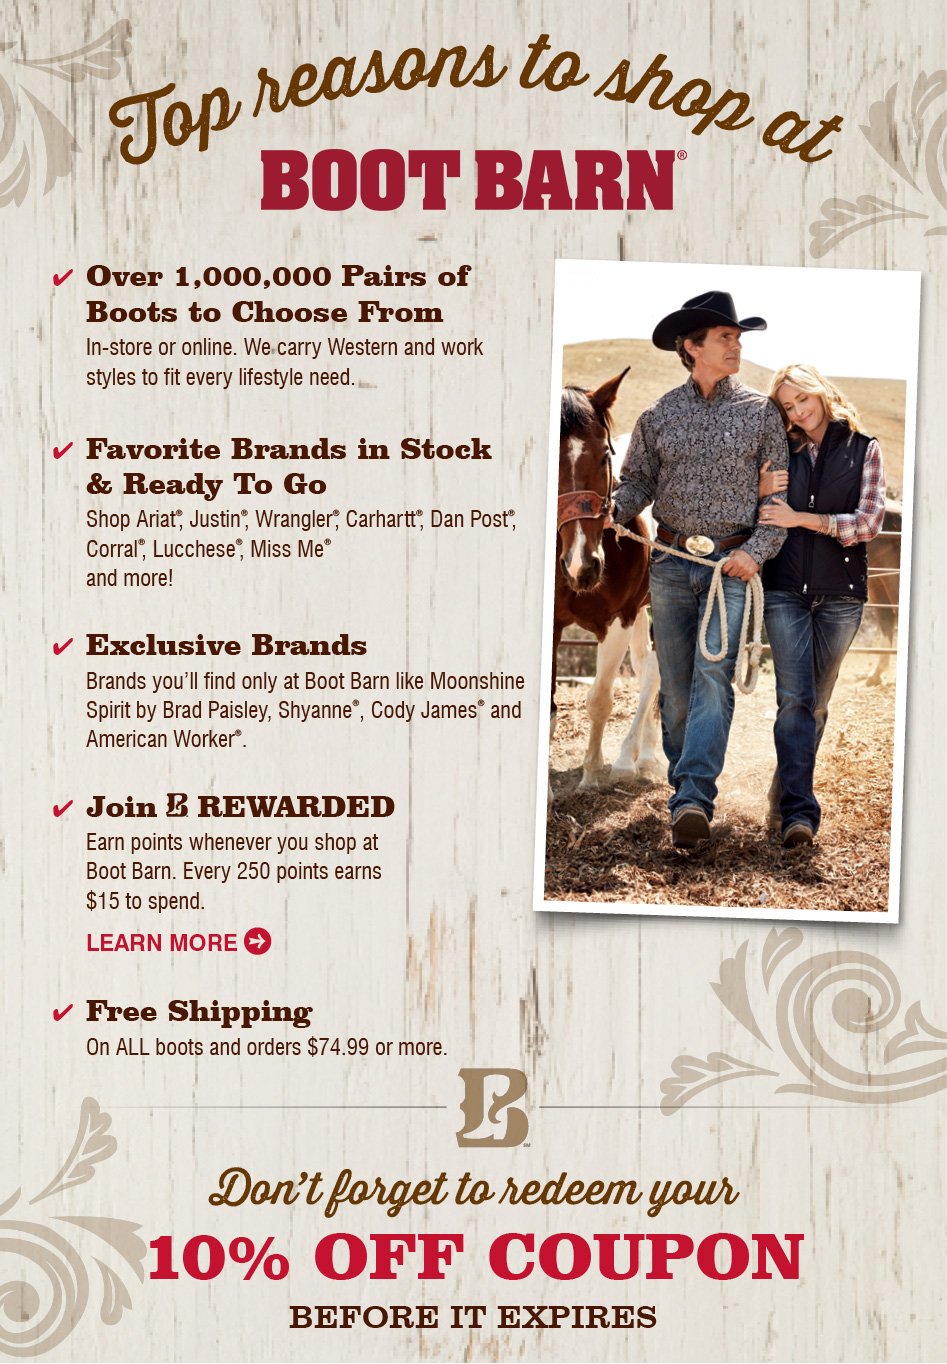 Top Reasons To Shop - Boot Barn Email 